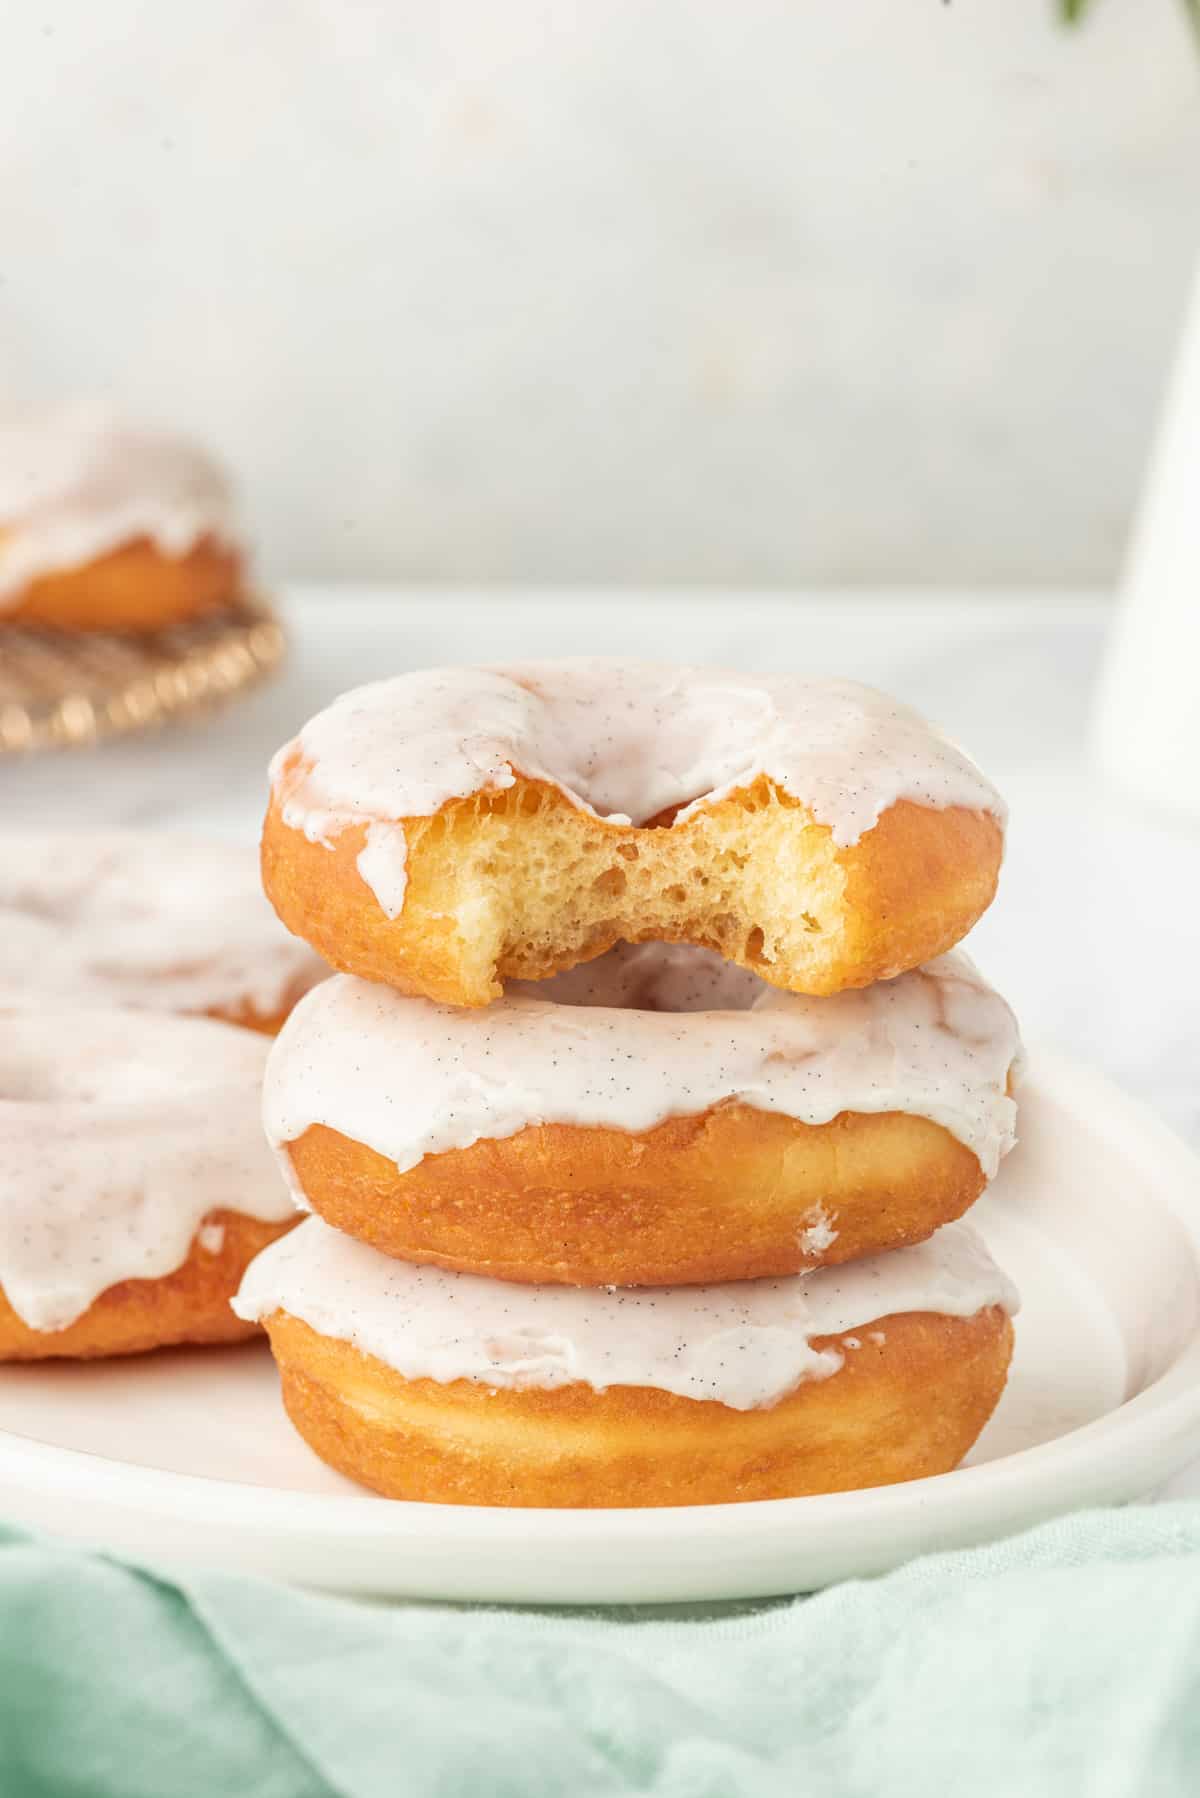 A stack of three donuts is presented on a white plate.